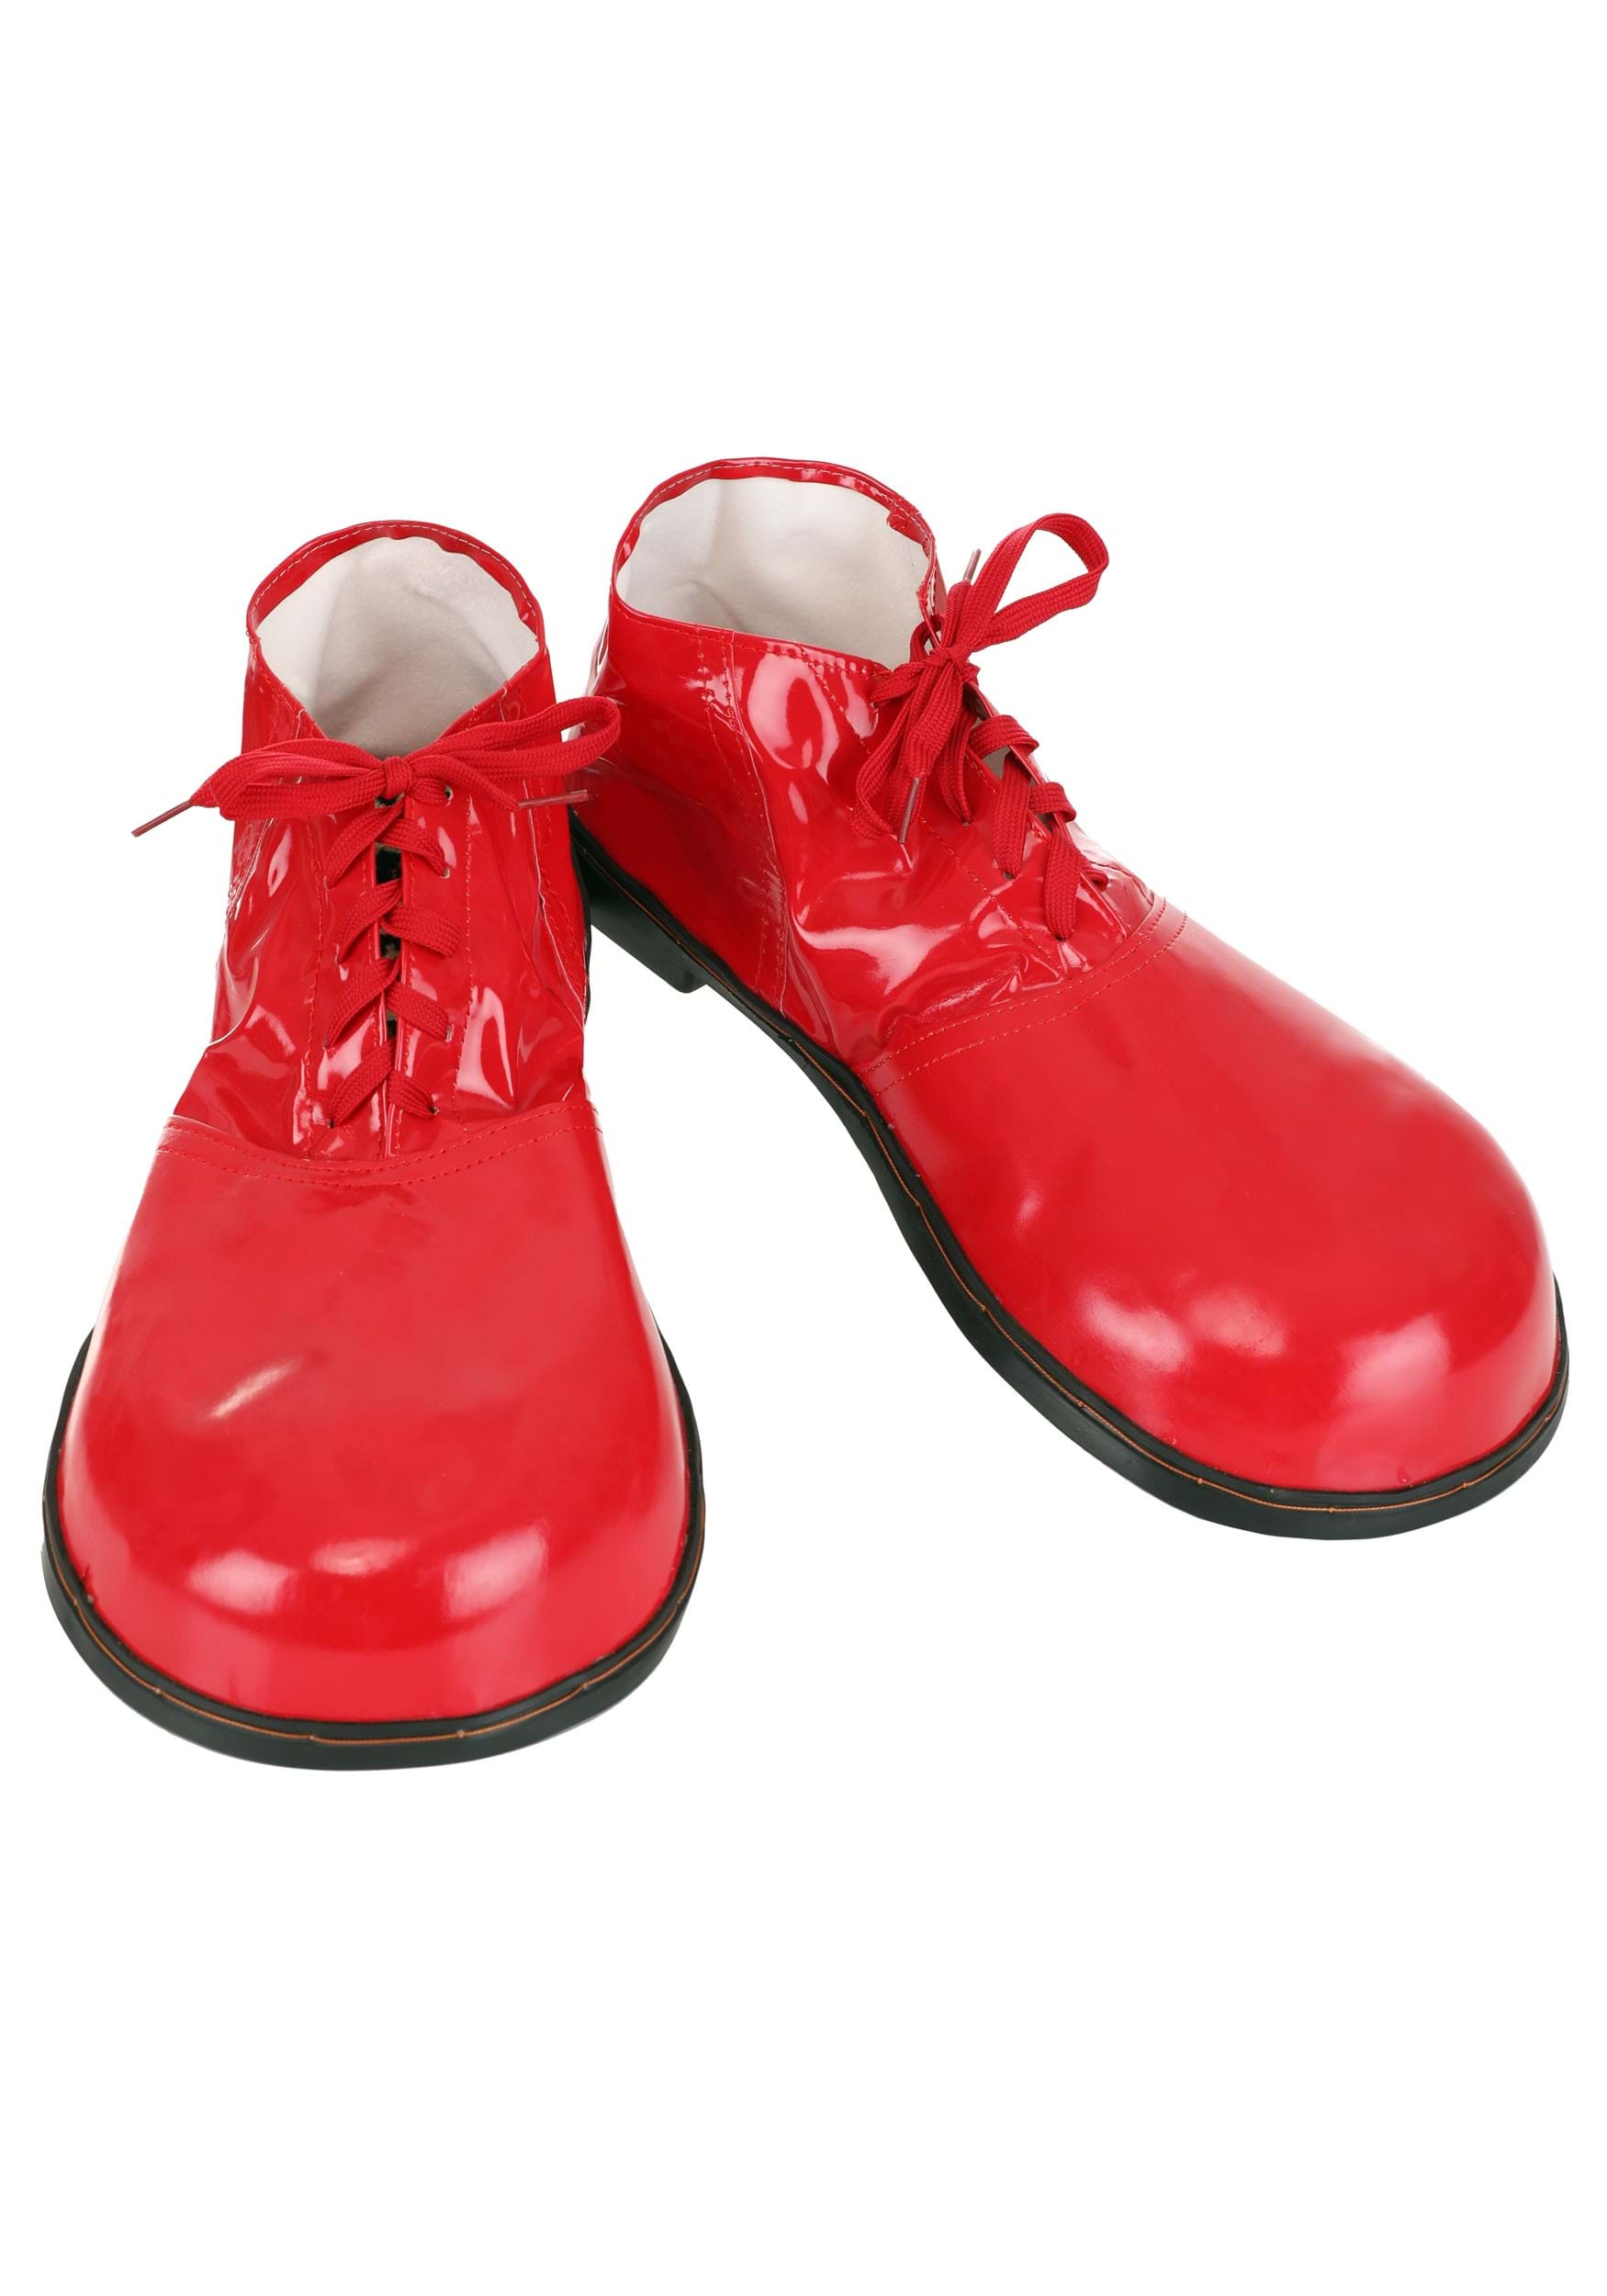 Womens Red Shoes : Target-totobed.com.vn